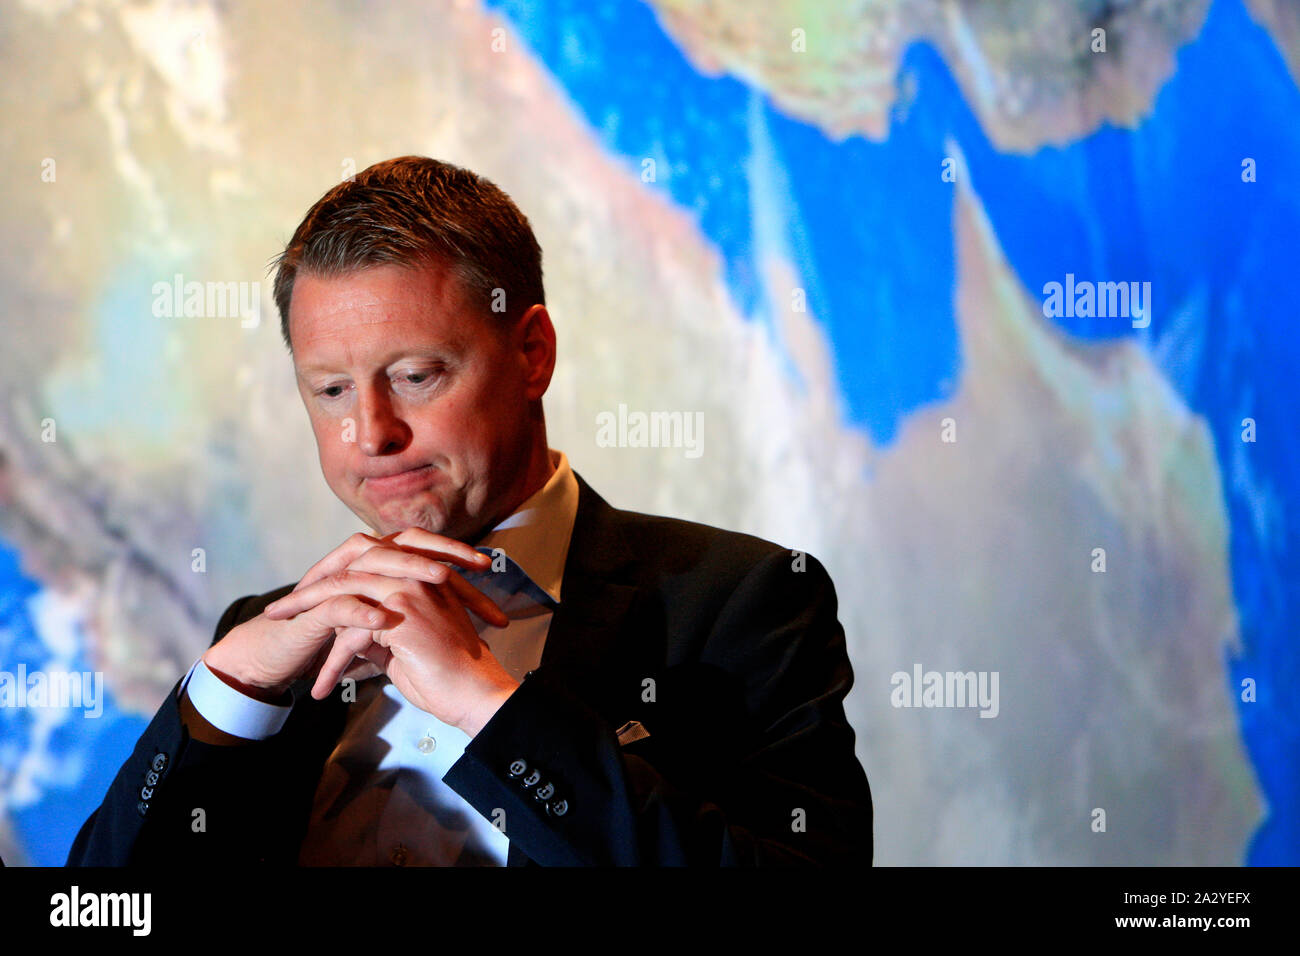 Hans Vestberg was appointed president and CEO of Ericsson in January 2010. As of October 25, 2007, he has been chief financial officer. Vestberg became senior vice president and head of Business Unit Global Services in 2003, and he was appointed executive vice president in 2005. Stock Photo